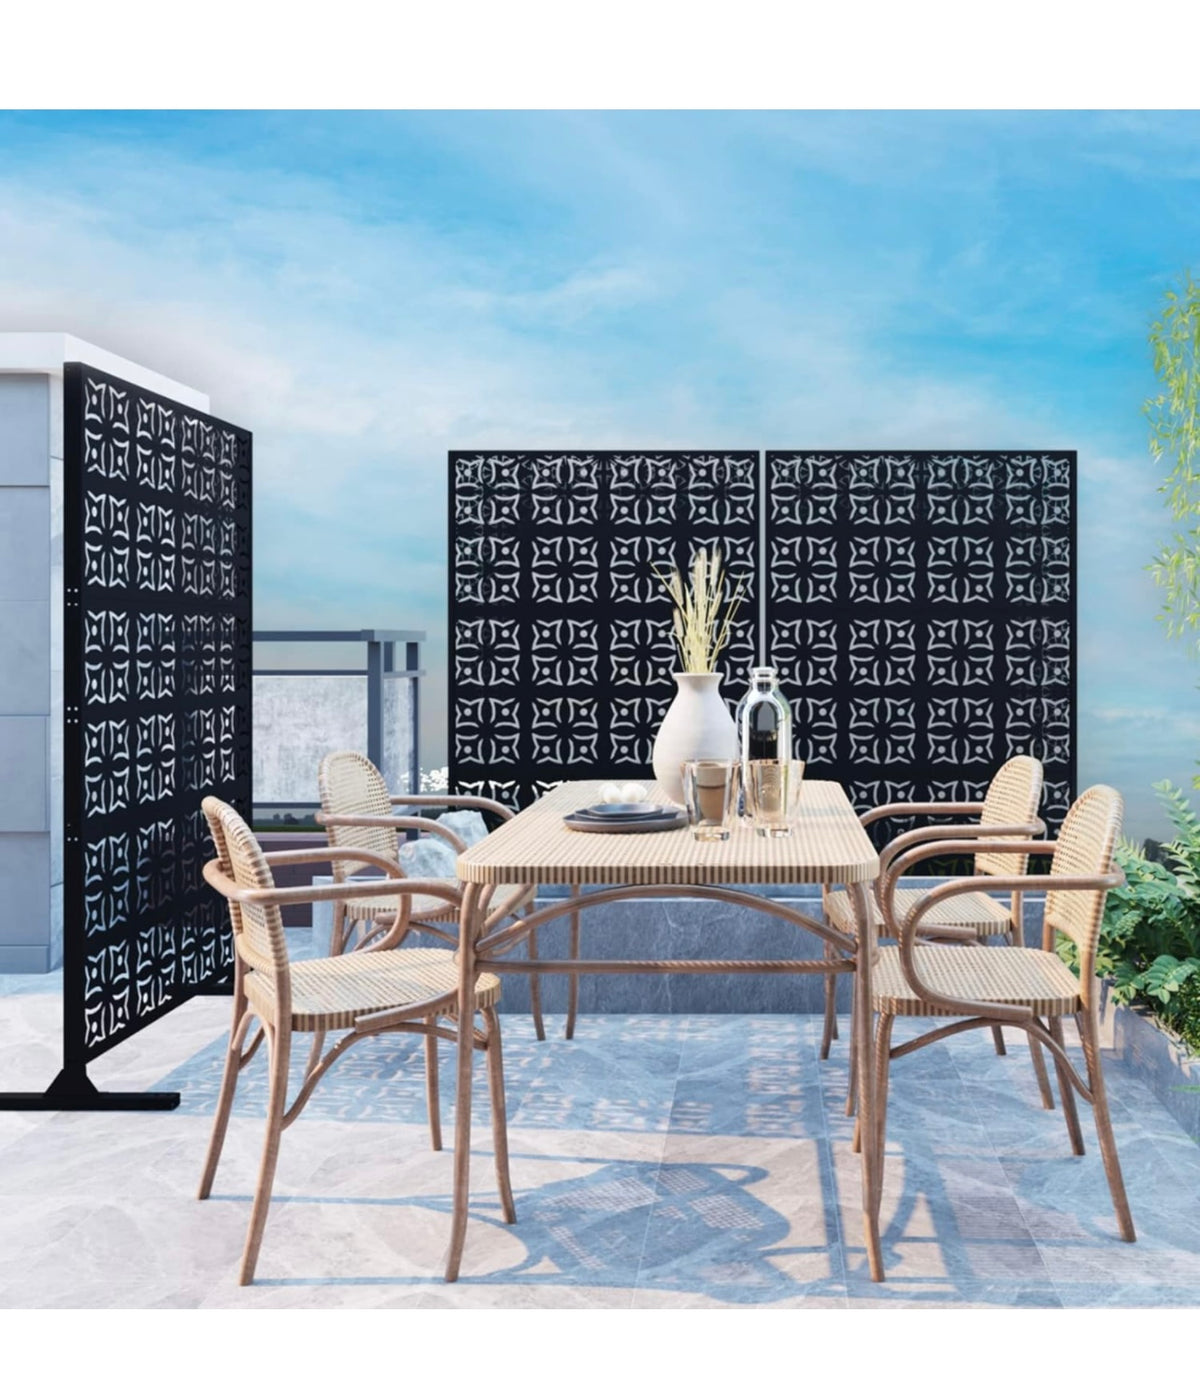 L44 Nisong Metal Privacy Screen